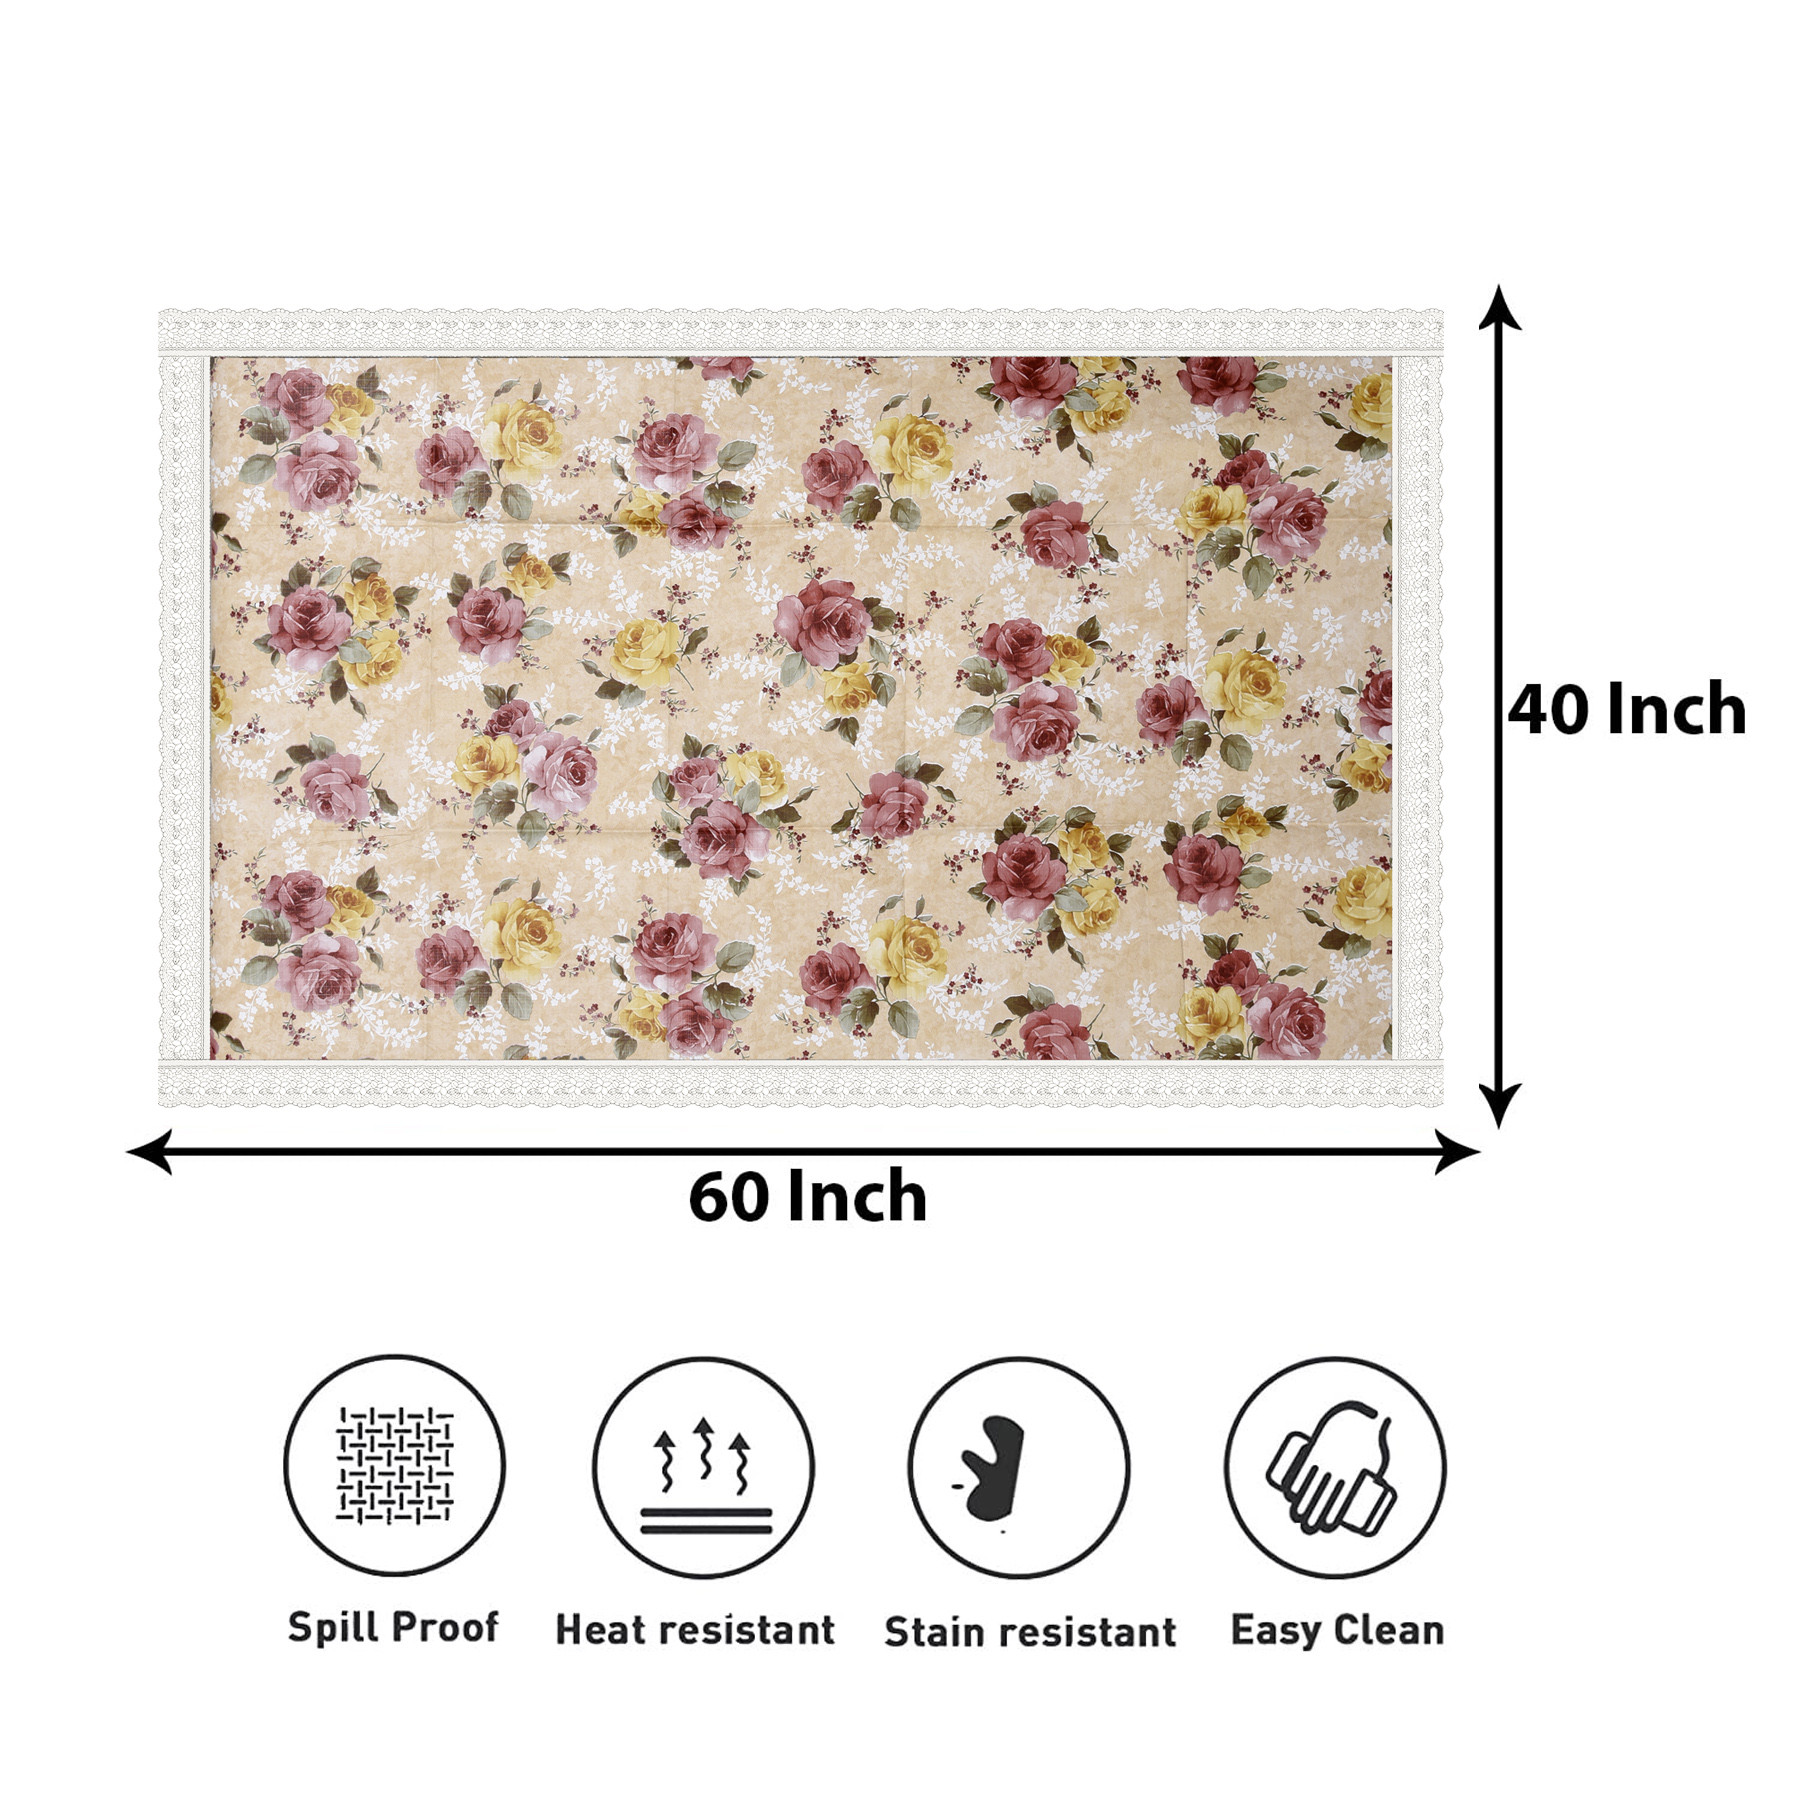 Kuber Industries Center Table Cover | PVC Table Cover | Reusable Cloth Cover for Table Top | Flower Design Center Table Cover | Table Protector Cover | 40x60 Inch | Beige